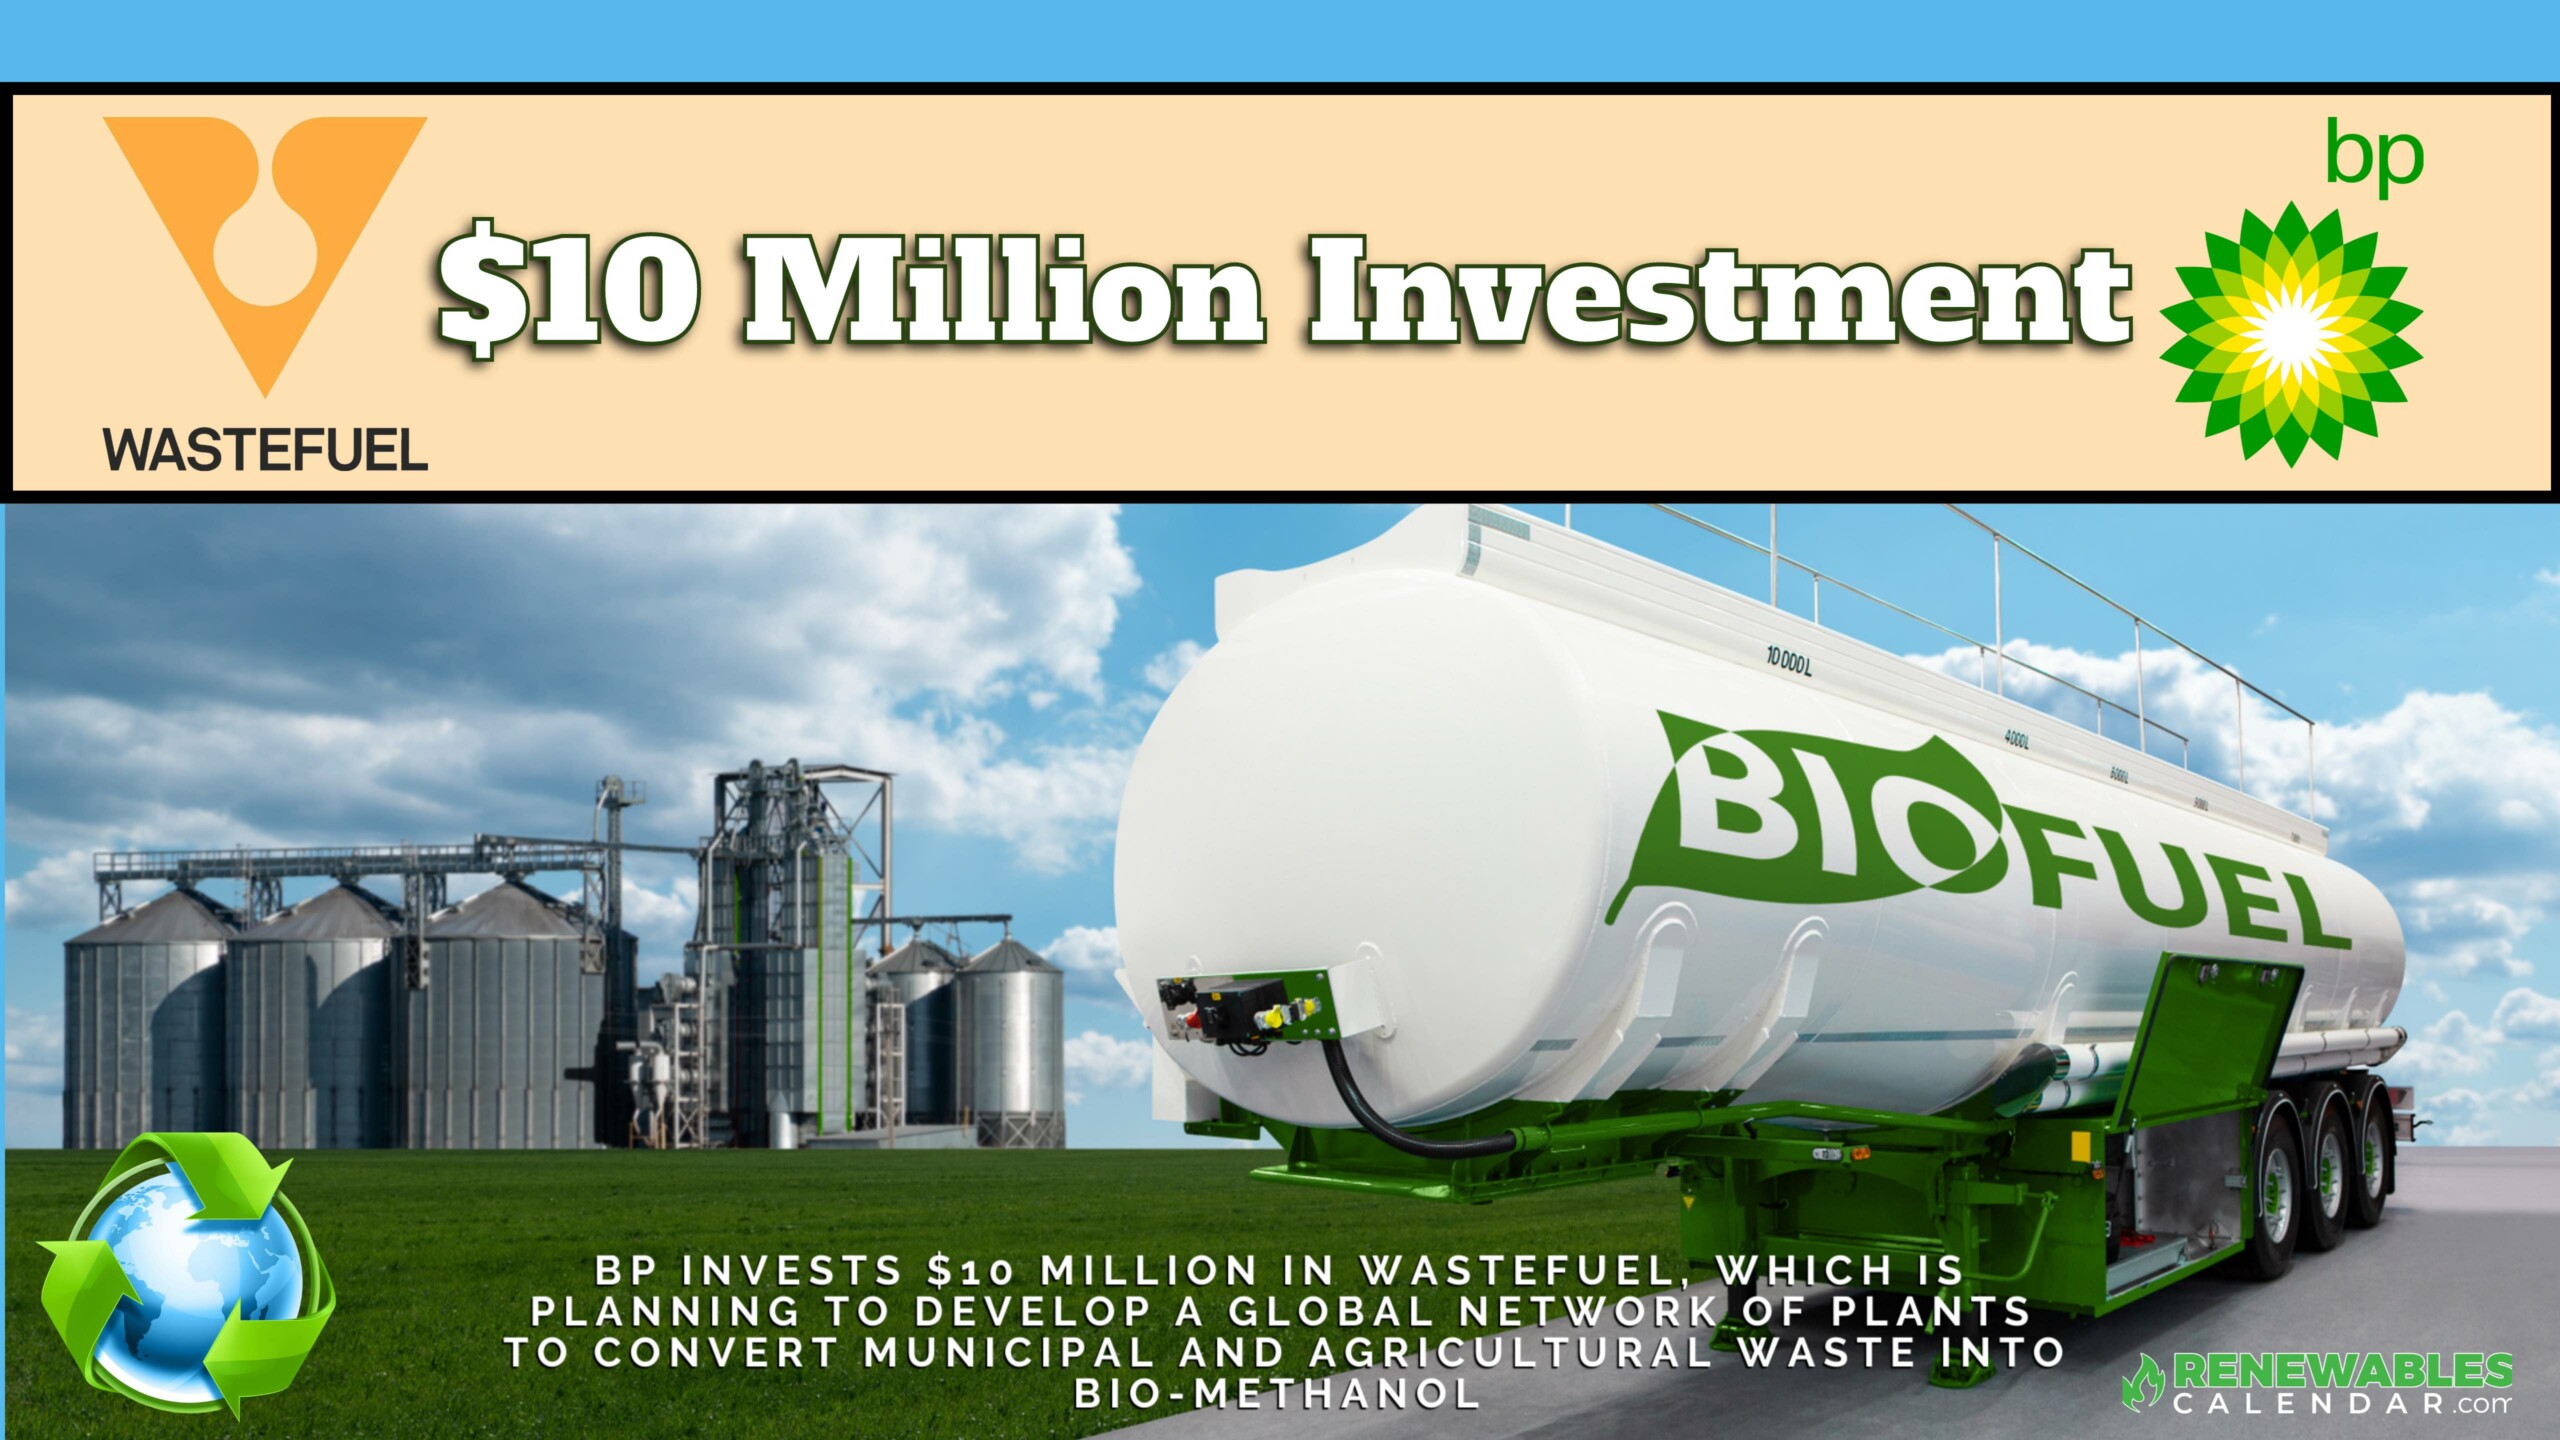 July 6: $10 Million Investment – bp expands investment in bioenergy, collaborating with US biofuels developer WasteFuel